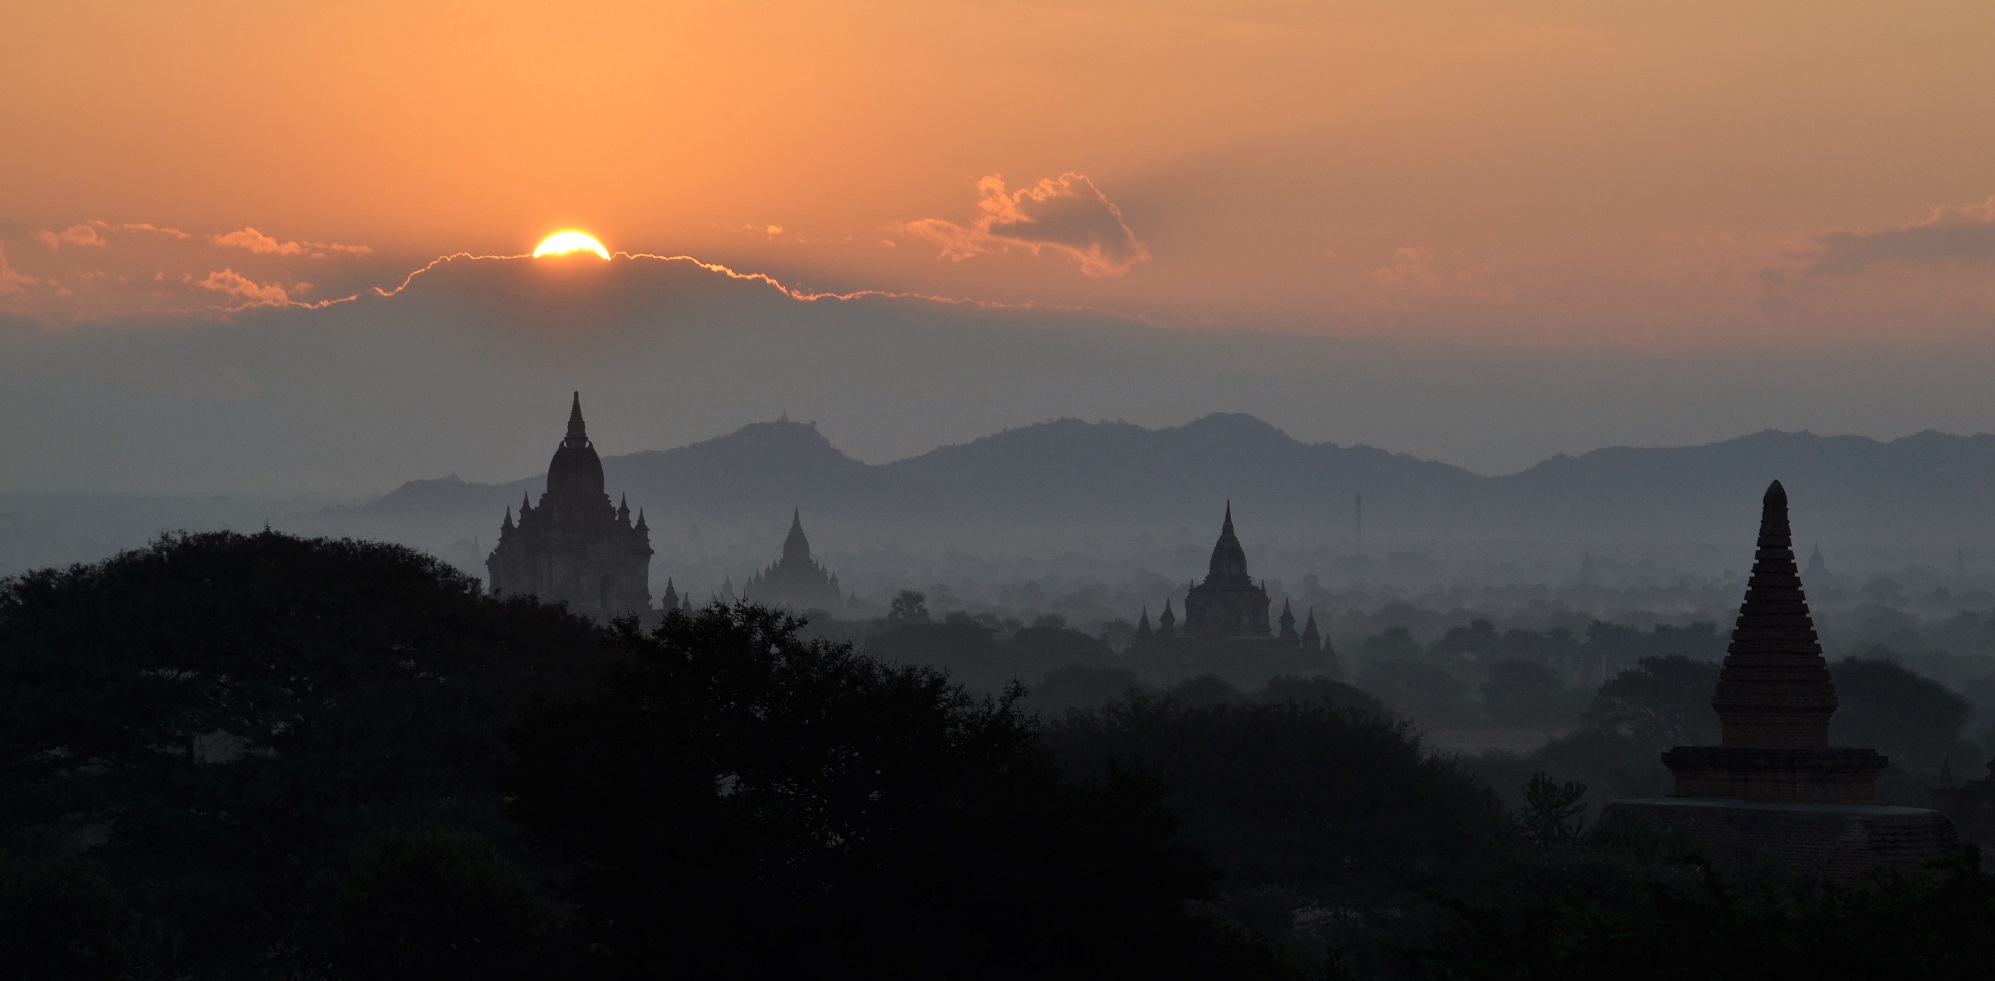 Sunset over the temples of Bagan in Myanmar